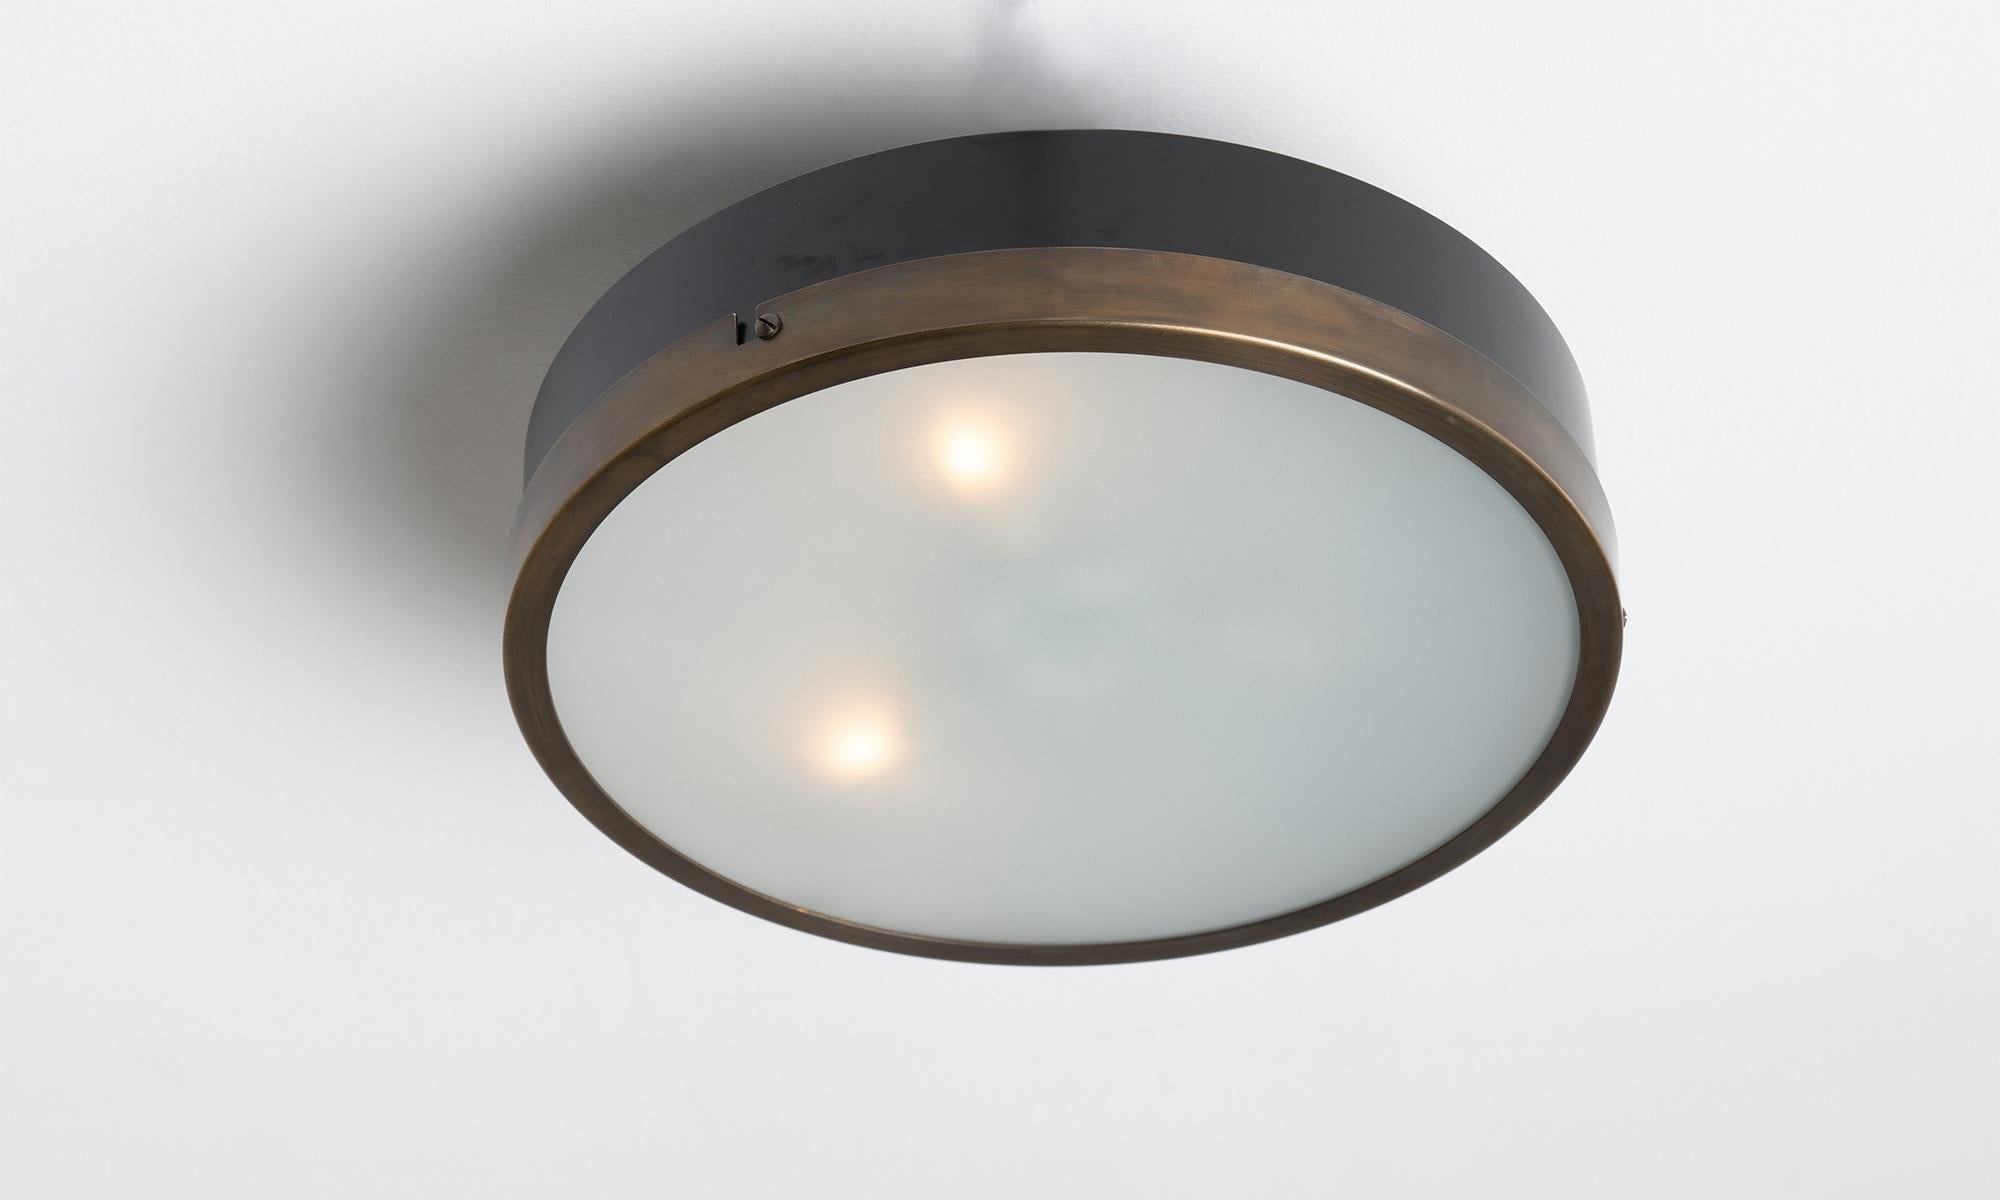 Black Metal and Satin Glass Ceiling Mount
Made in Italy
Black metal surround with brass hardware and satin glass diffuser.
10”dia x 4.5”h
Ref. L4366

*4-6 Week Lead Time*
*EU Wiring / Not UL Listed*
*Mounting Hardware Included, Ceiling Plate = 3